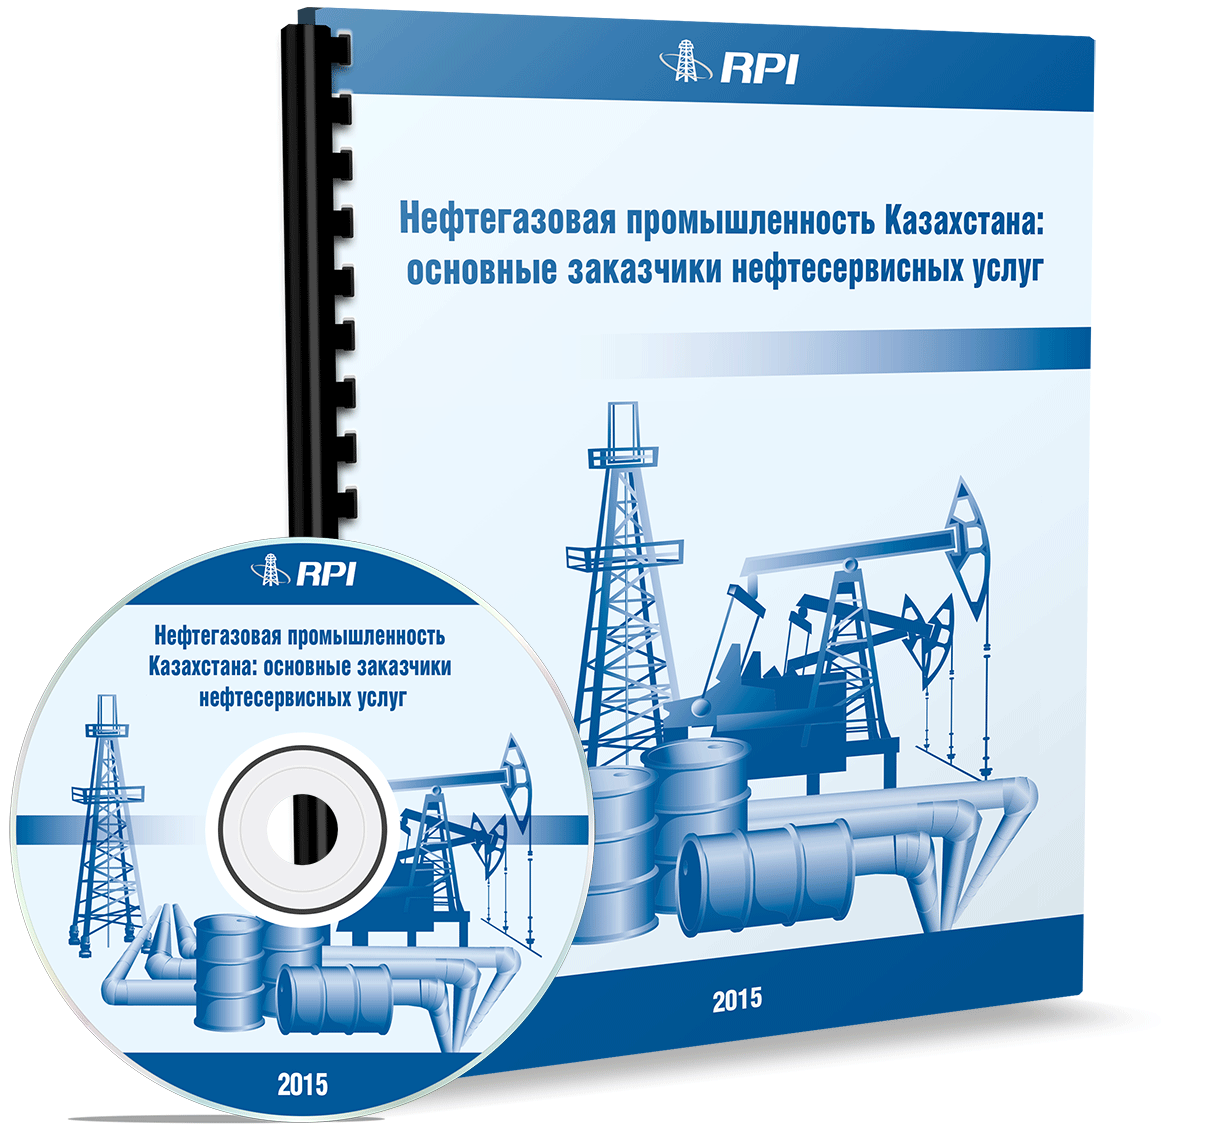 Oil and Gas Industry of Kazakhstan: Growing Demand for High-Tech Services